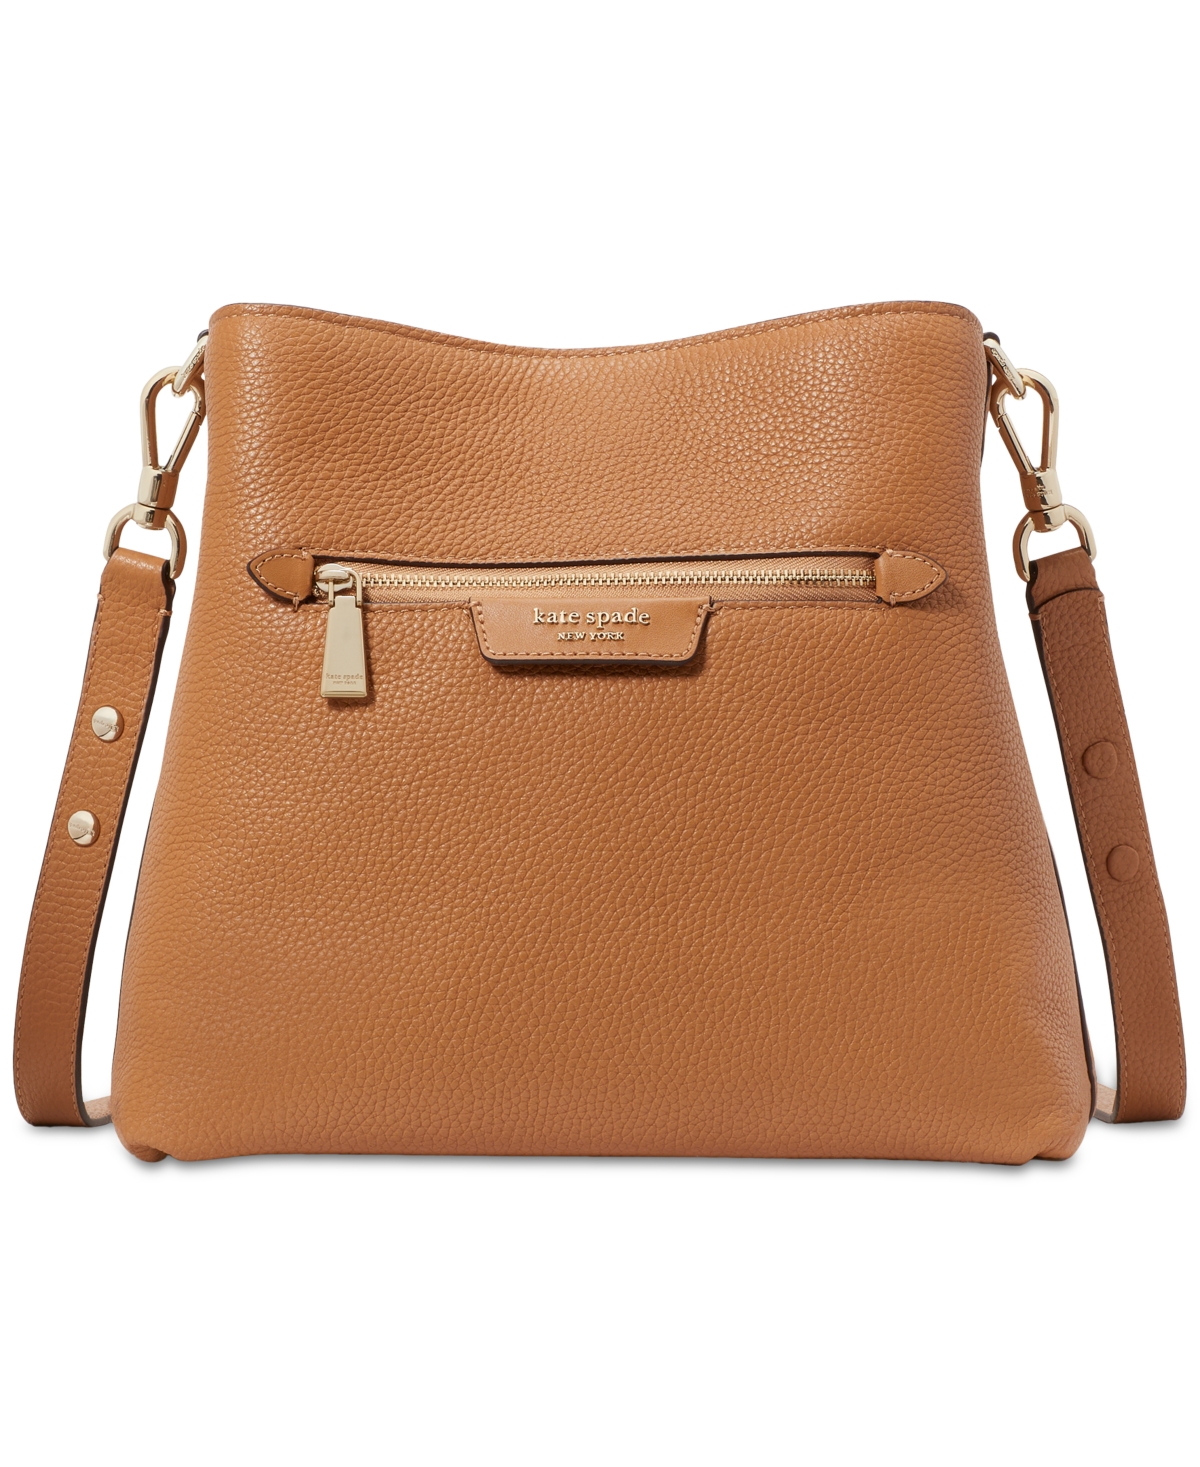 Hudson Pebbled Leather Small Shoulder Bag - Mountain P